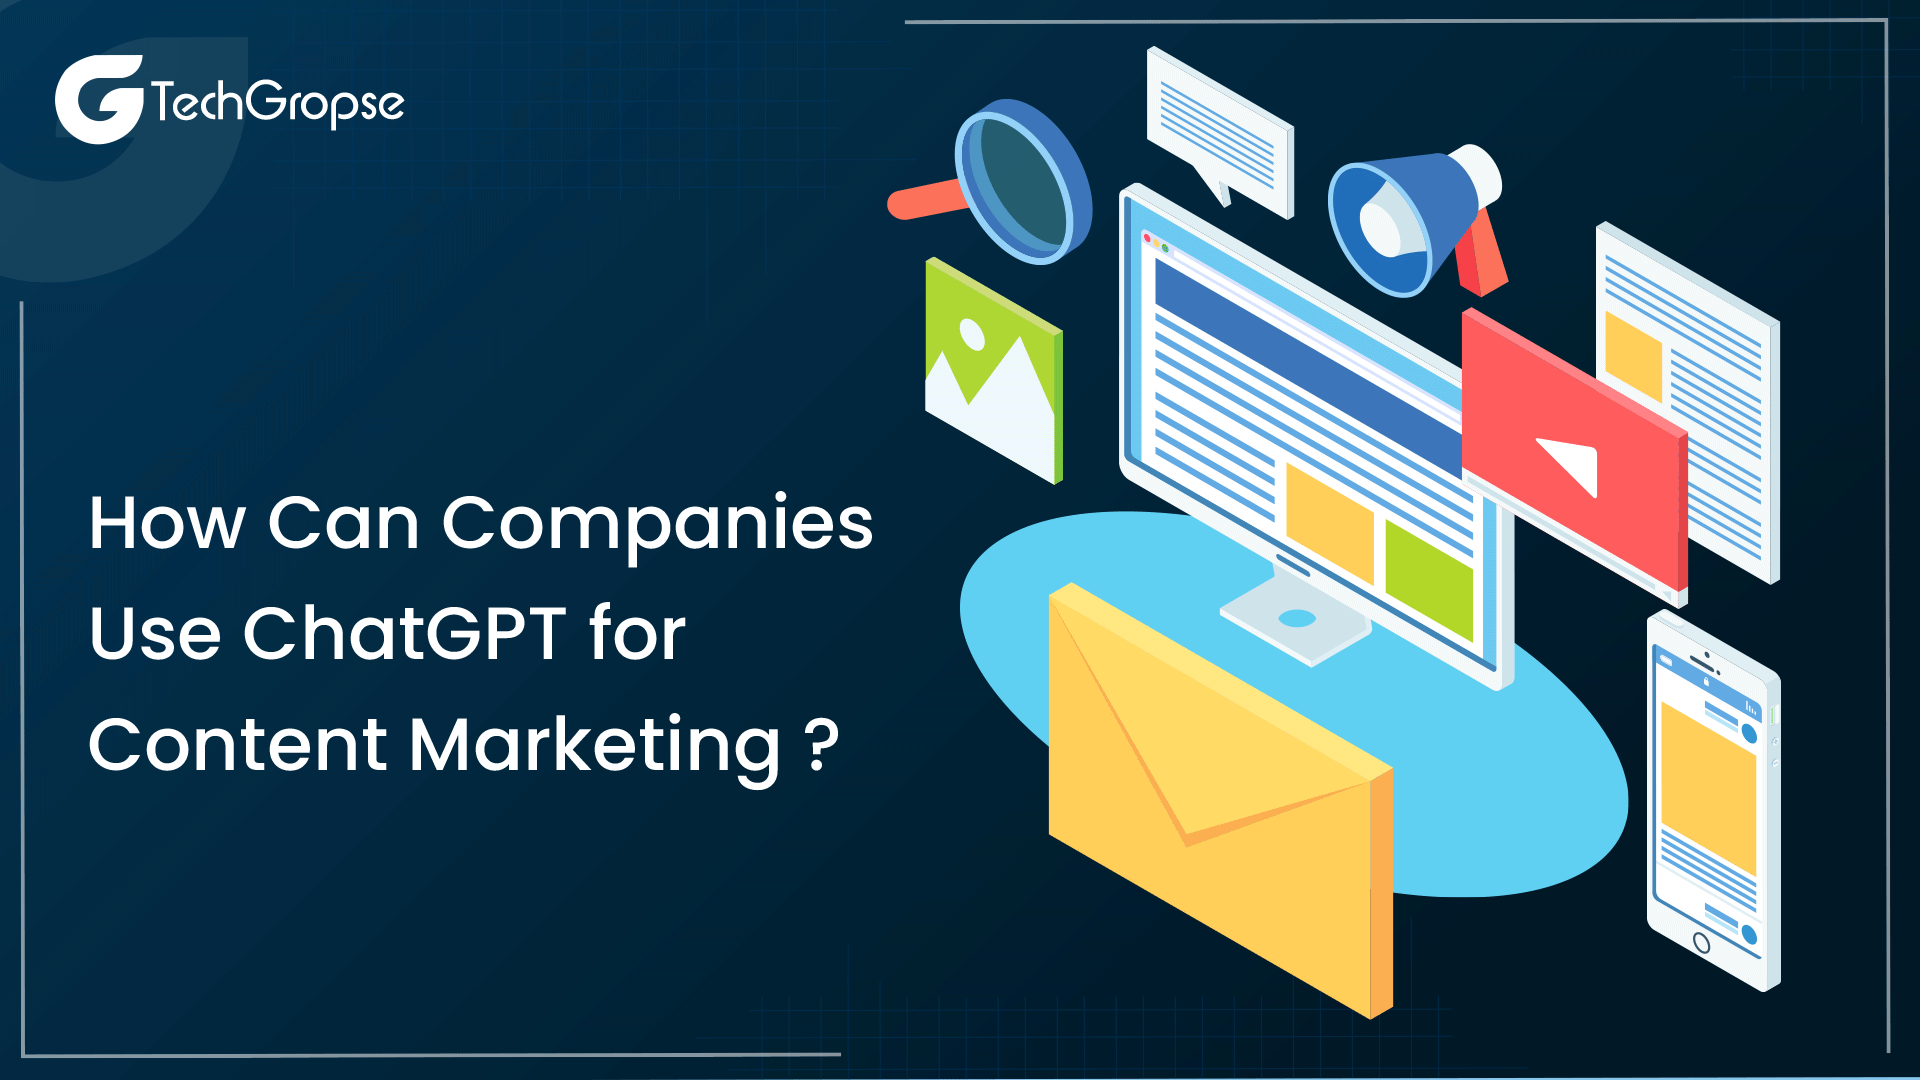 How Can Companies Use ChatGPT for Content Marketing